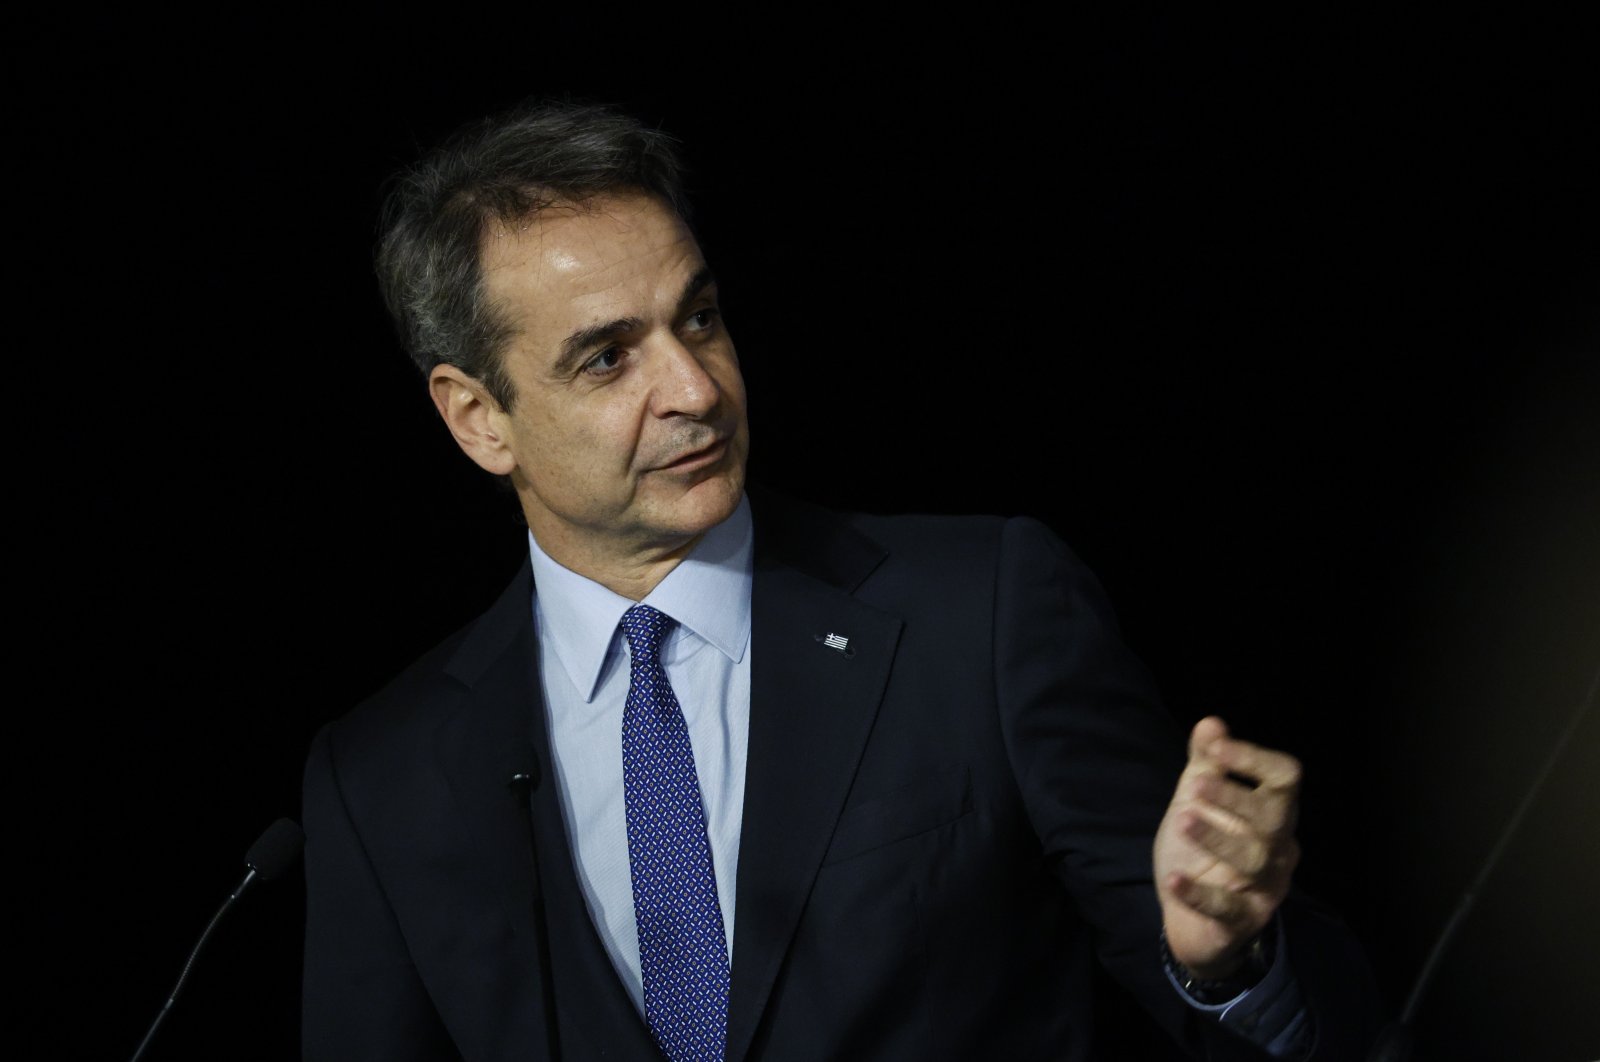 Greek Prime Minister Kyriakos Mitsotakis takes part in a press conference following the 9th Summit of the Leaders of the Southern Countries of the European Union, Alicante, Spain, Dec. 9, 2022. (EPA Photo)